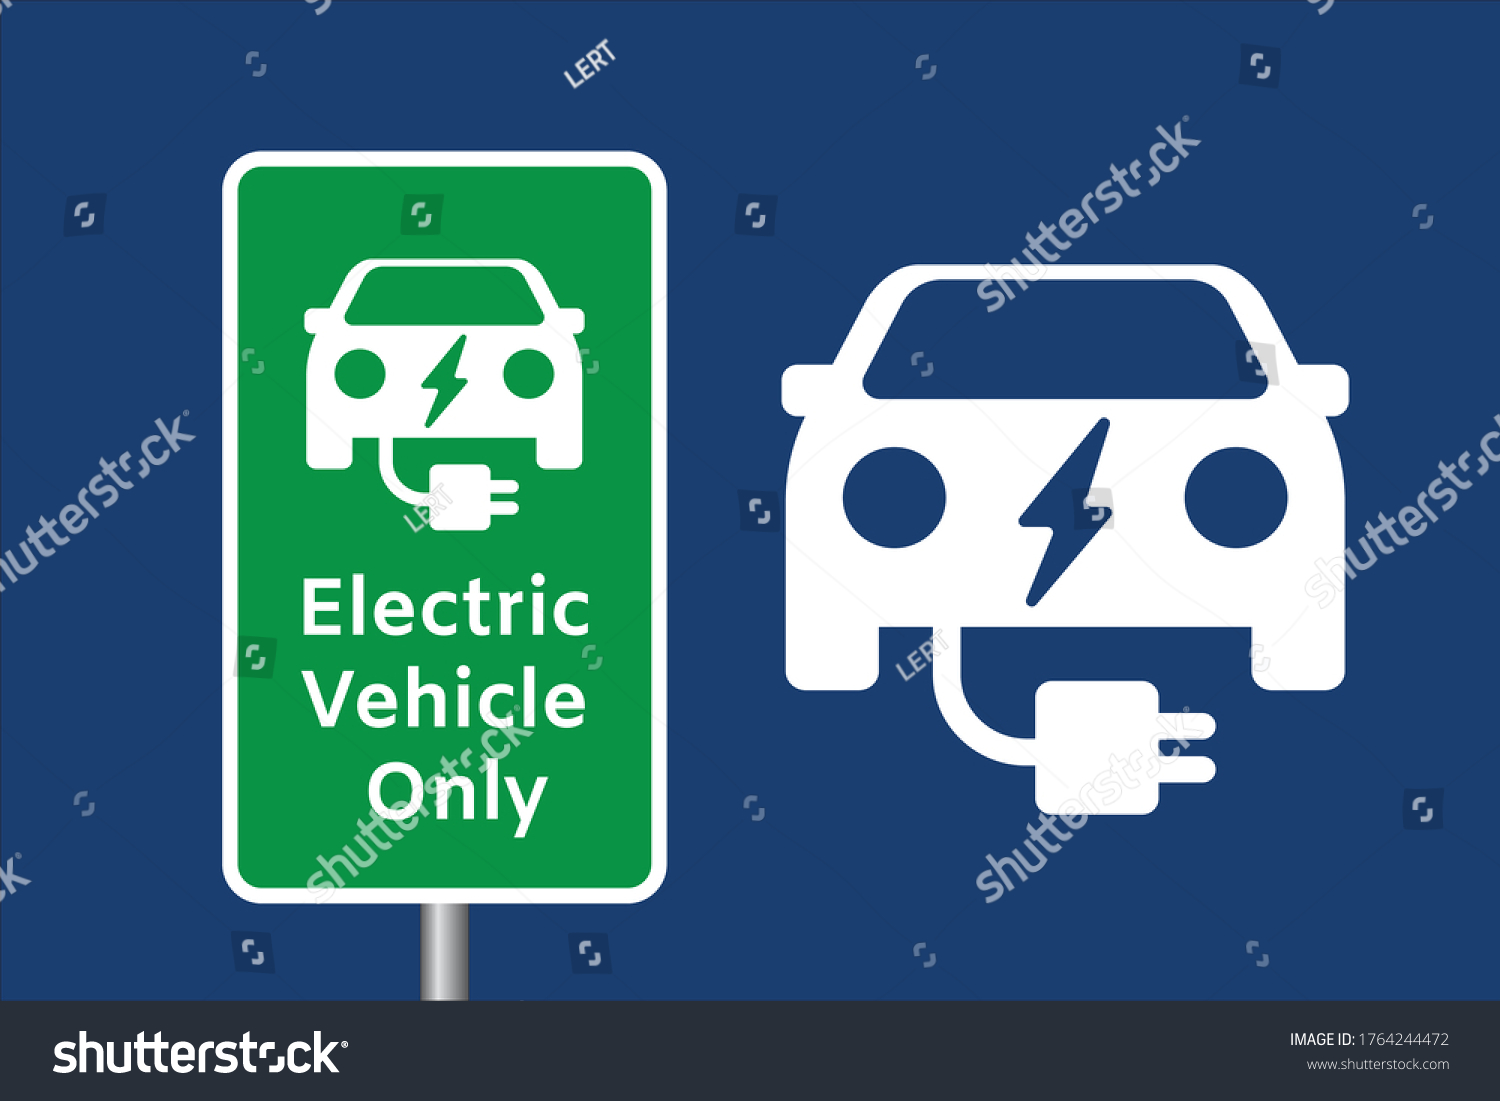 SVG of Road sign template of Electric Vehicle Only with Electric Vehicle vector icon illustration. flat design svg